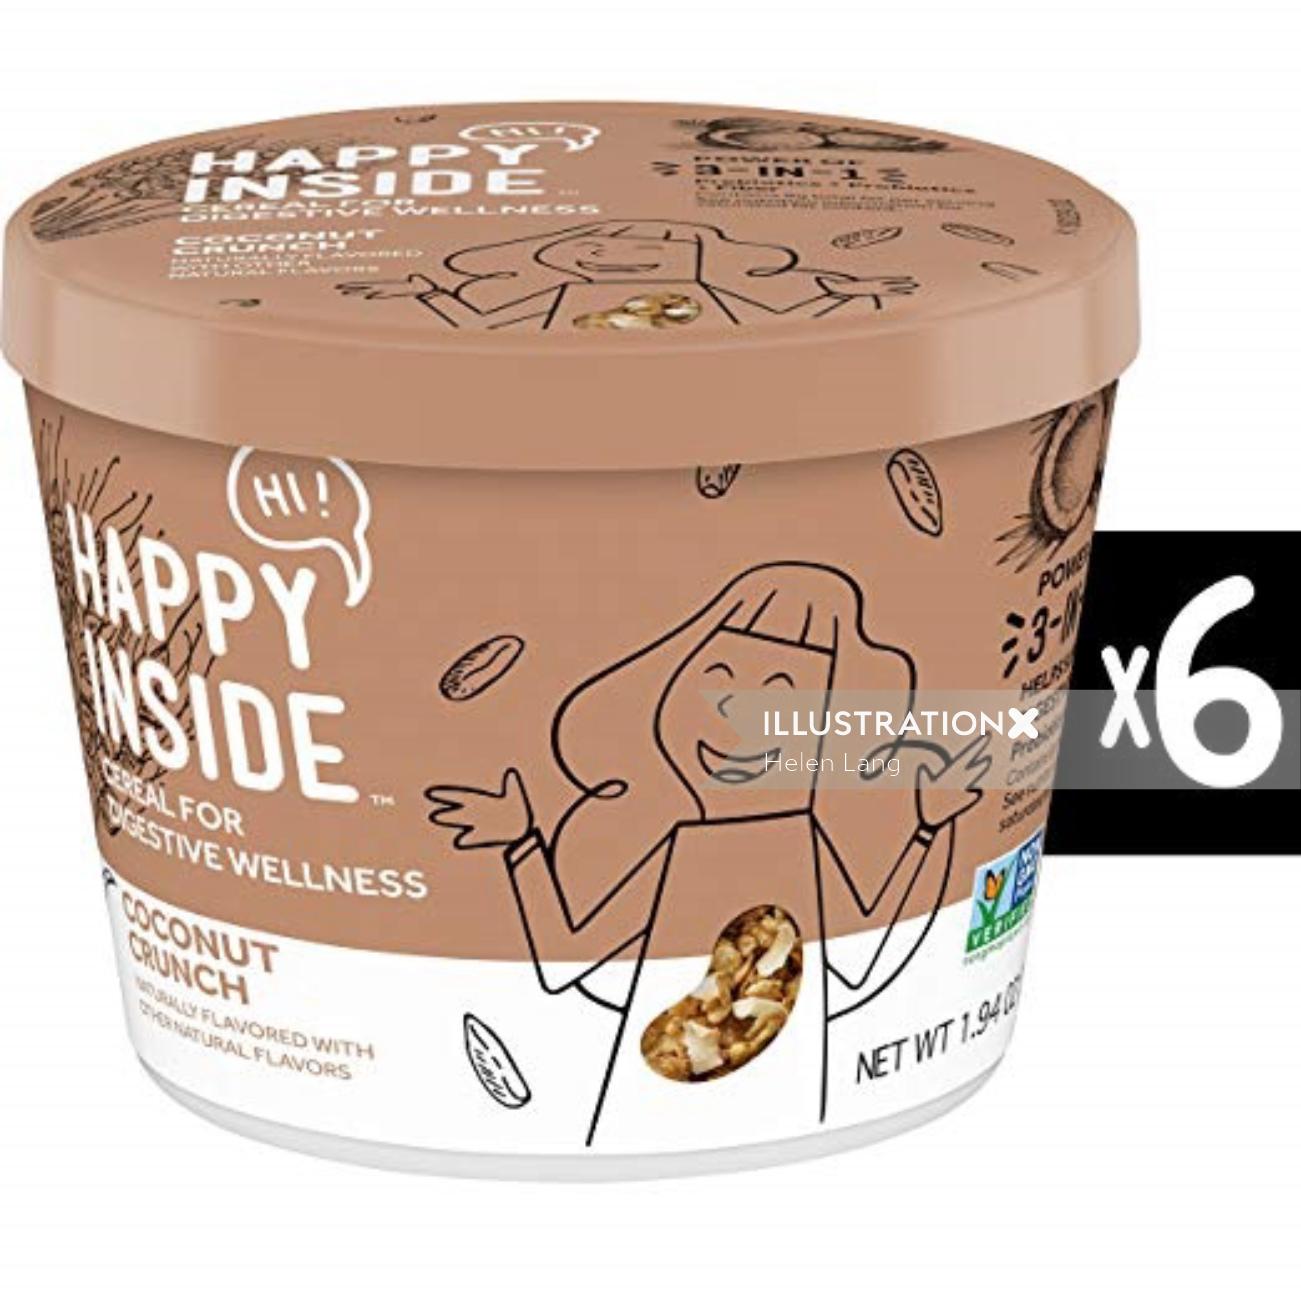 Product packaging illustration of Happy Inside 